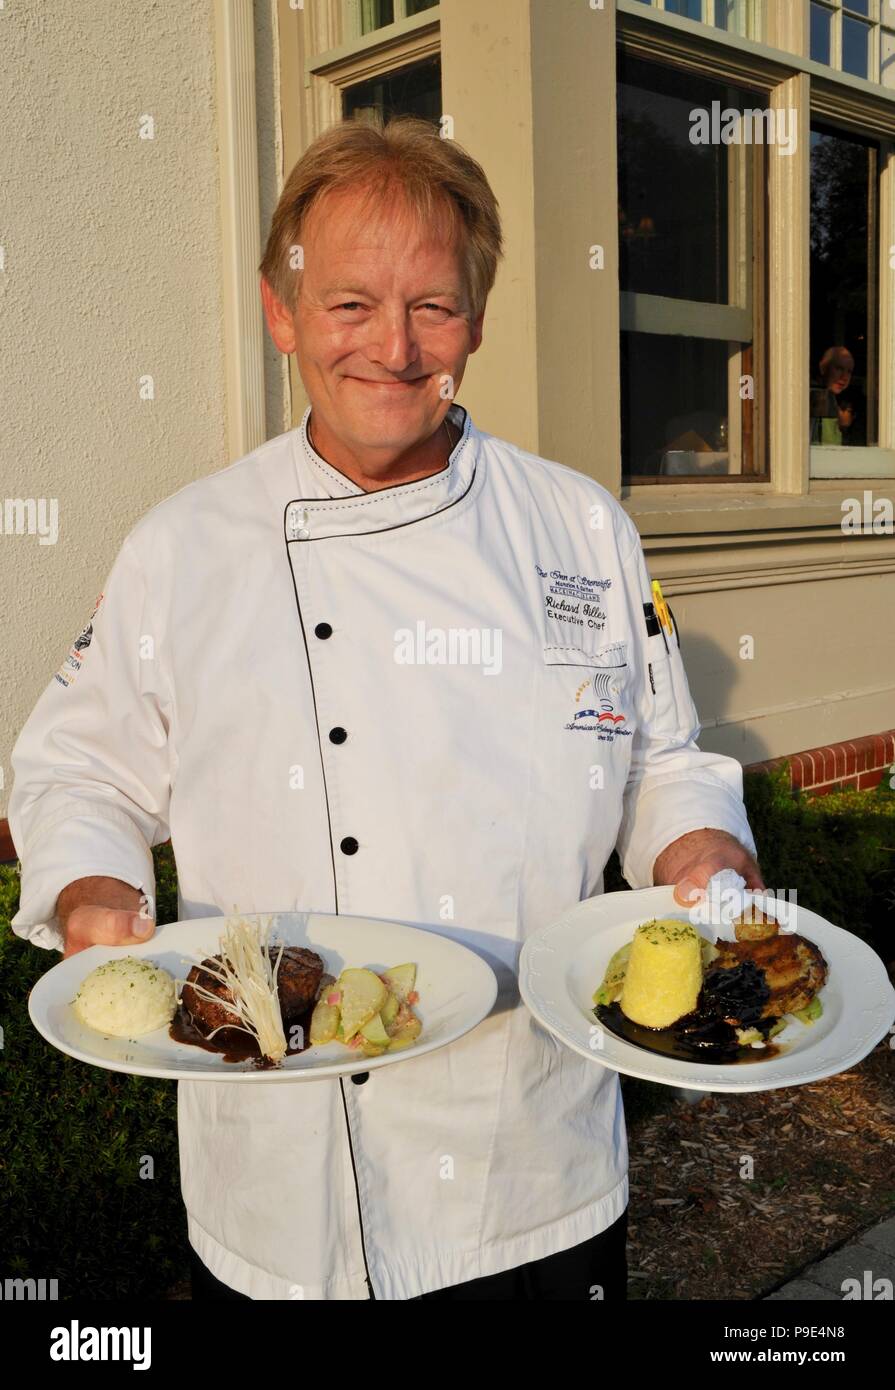 Executive Chef holding plated entrees to be served at The Cudahy Chophouse Restaurant at The Inn at Stonecliffe, Mackinac Island, Michigan, USA Stock Photo